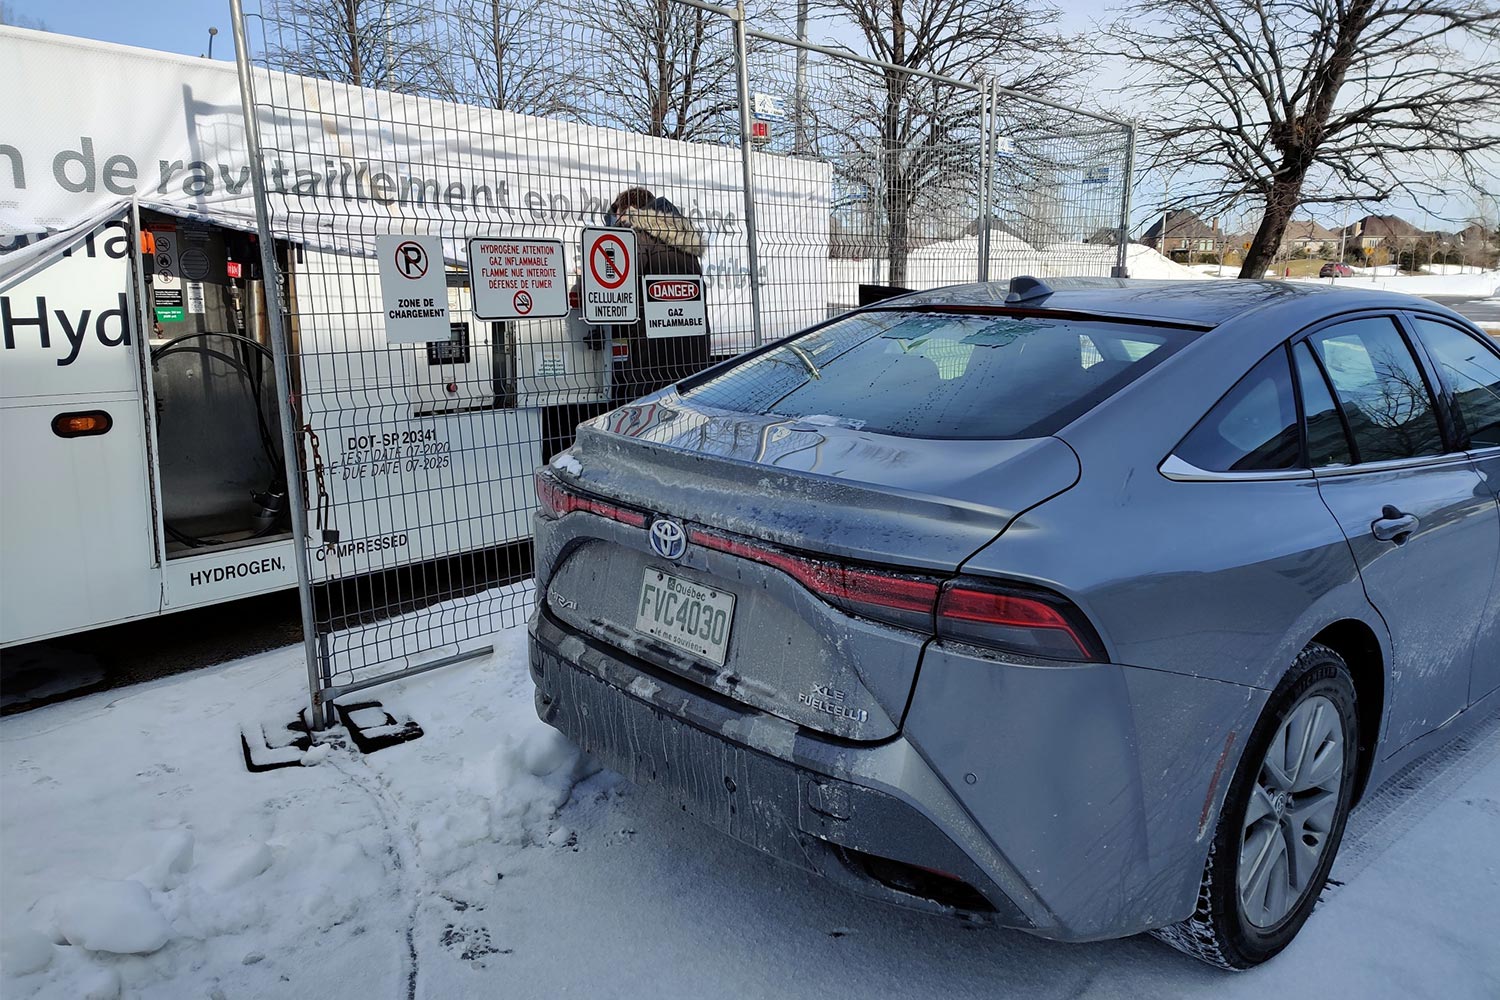 The hydrogen fueling station towed to the Toyota office in Montreal, Quebec